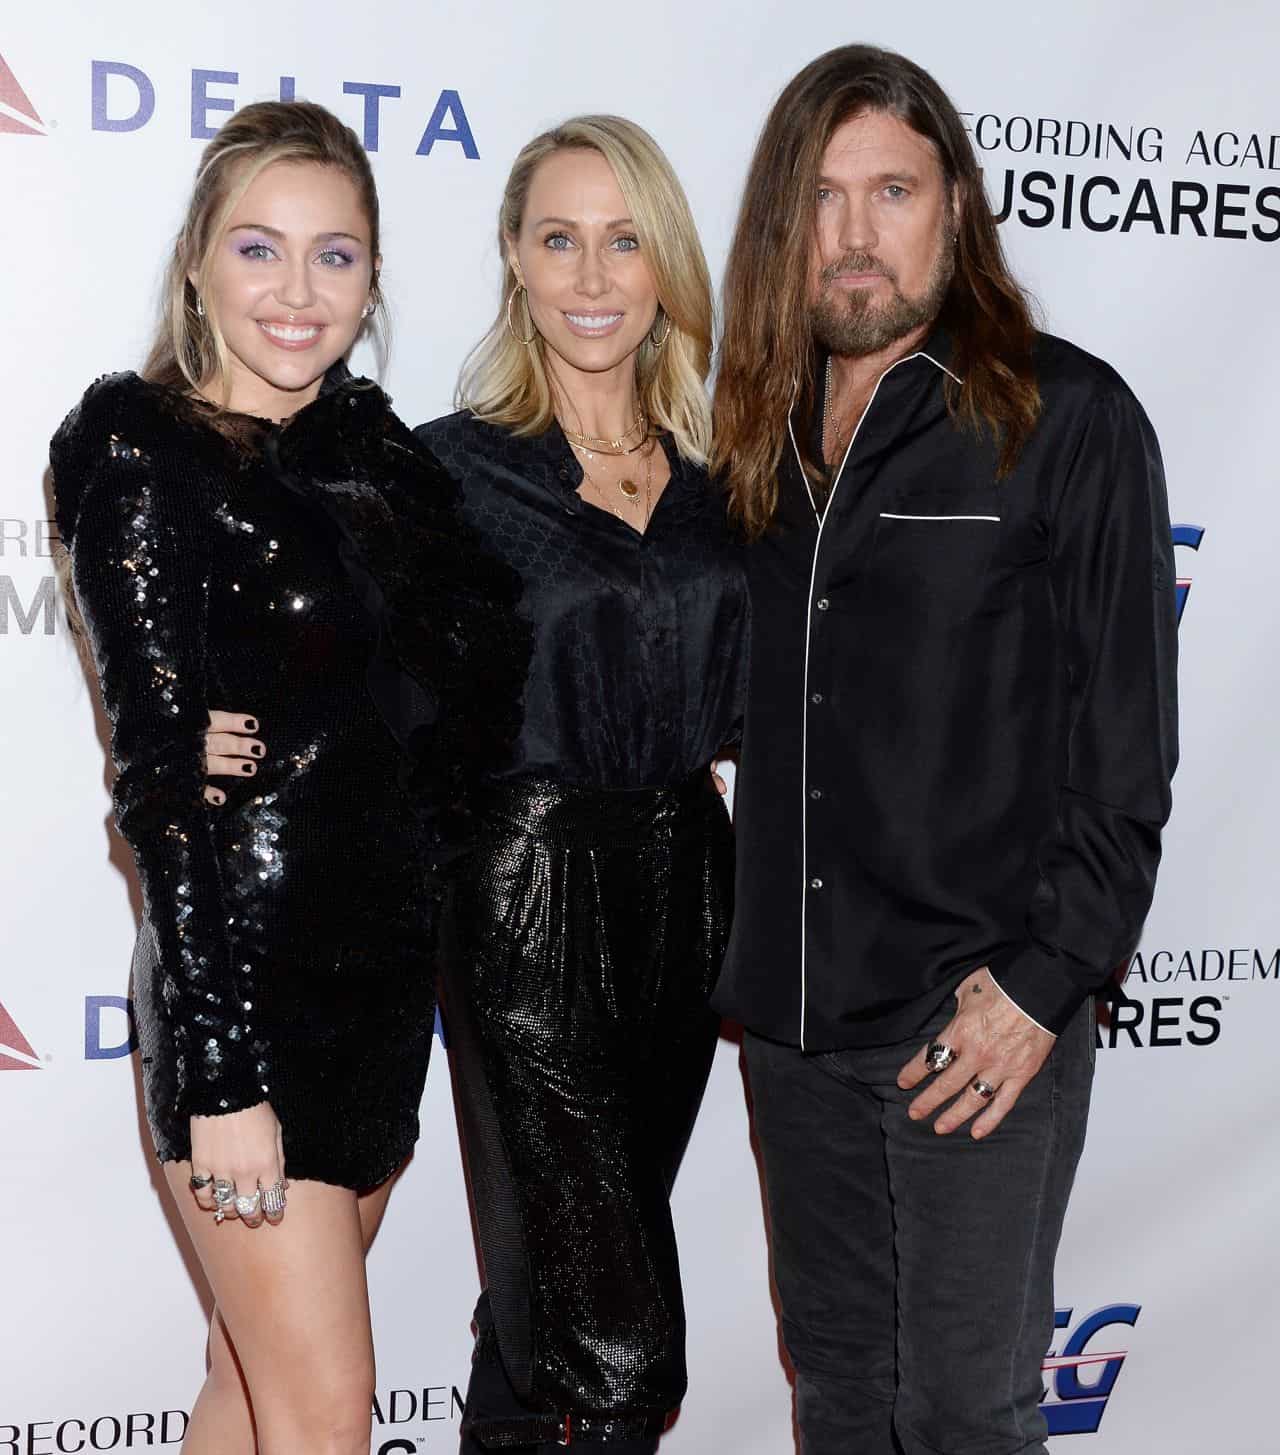 Miley Cyrus Shines in a Glamorous Little Black Dress at the MusiCares Event